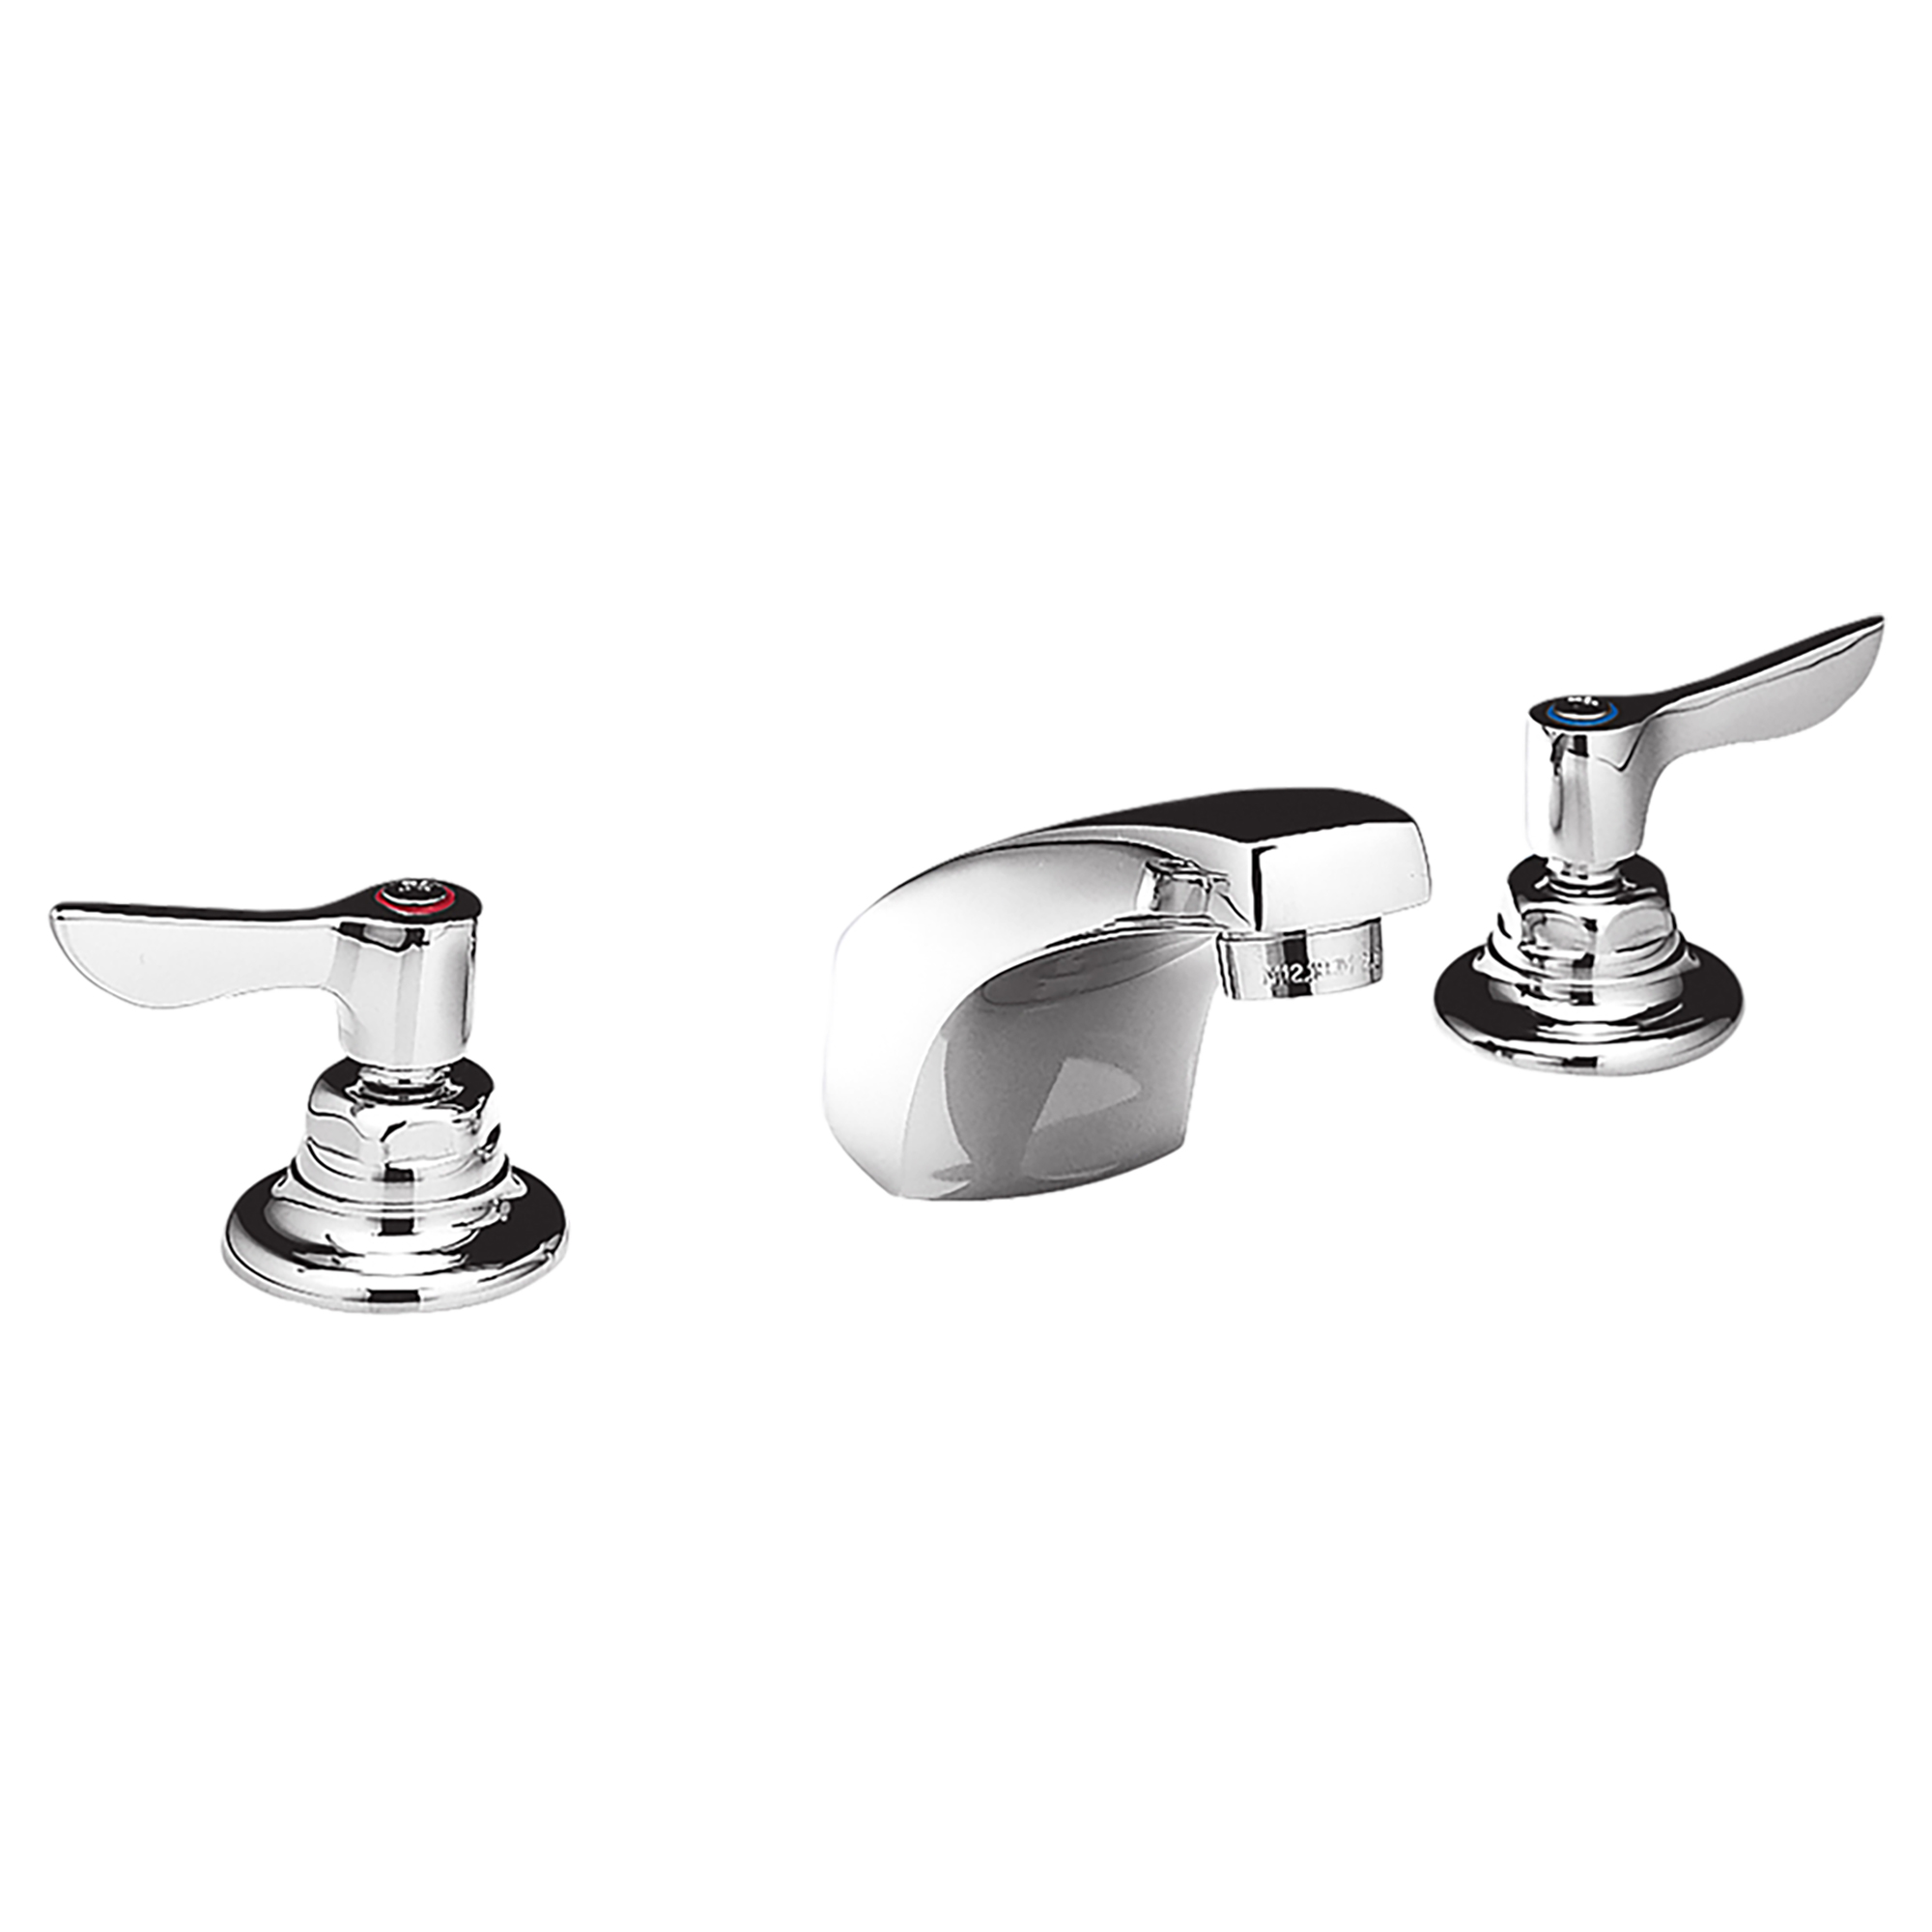 Monterrey® 8-Inch Widespread Cast Faucet With Lever Handles 0.5 gpm/1.9 Lpm